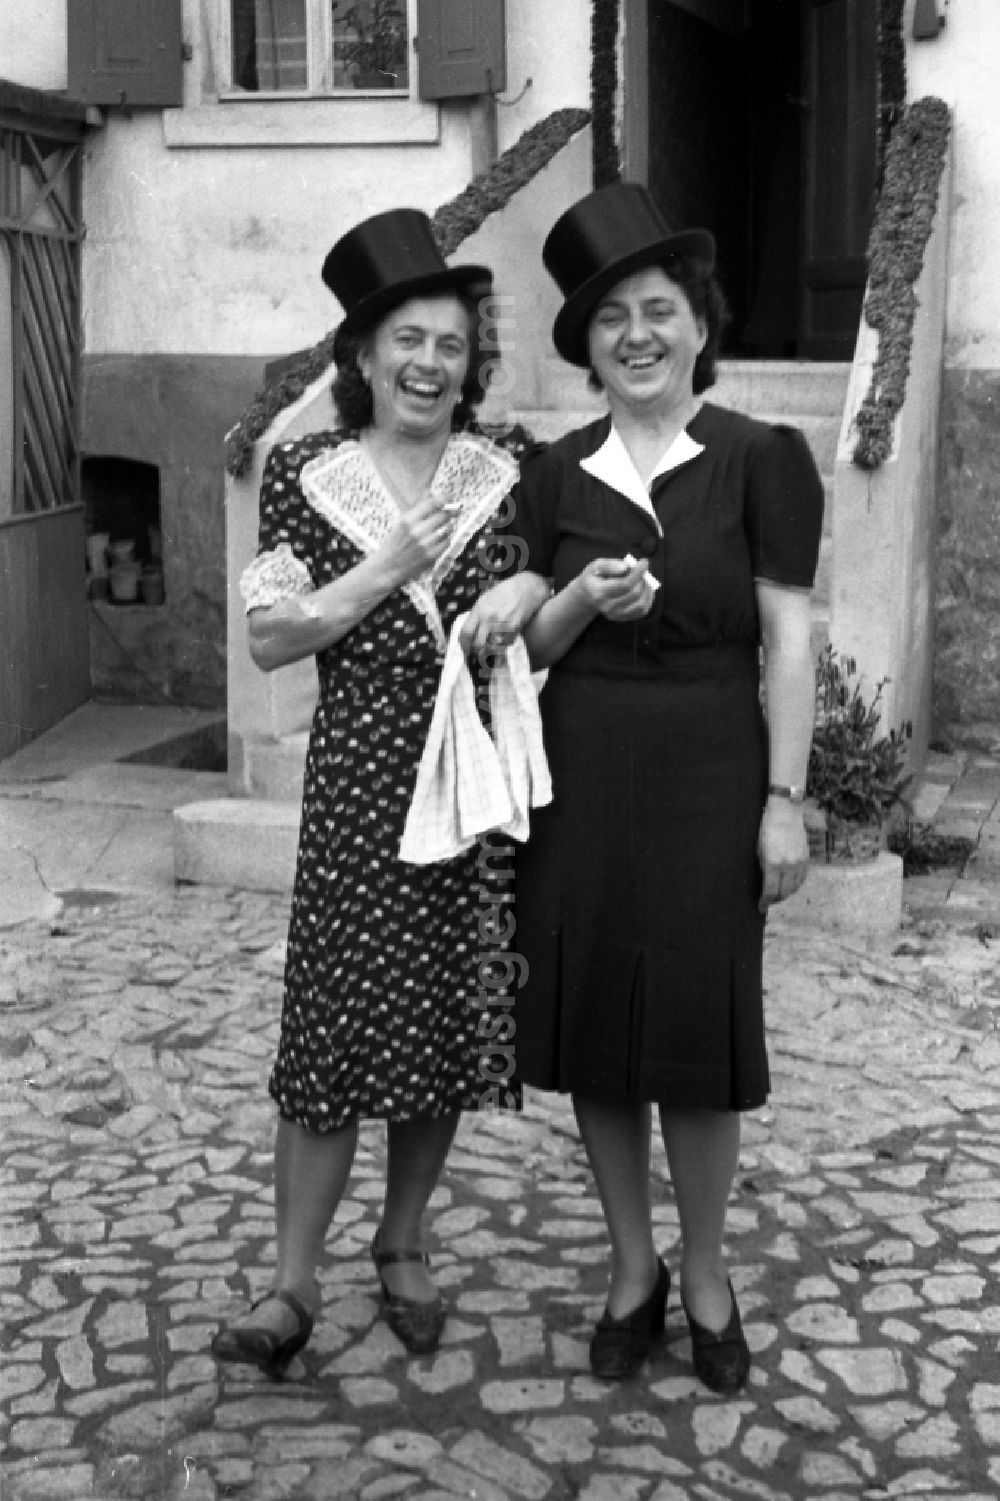 GDR picture archive: Merseburg - Two laughing women with cylinders on the head in Merseburg in the federal state Saxony-Anhalt in Germany